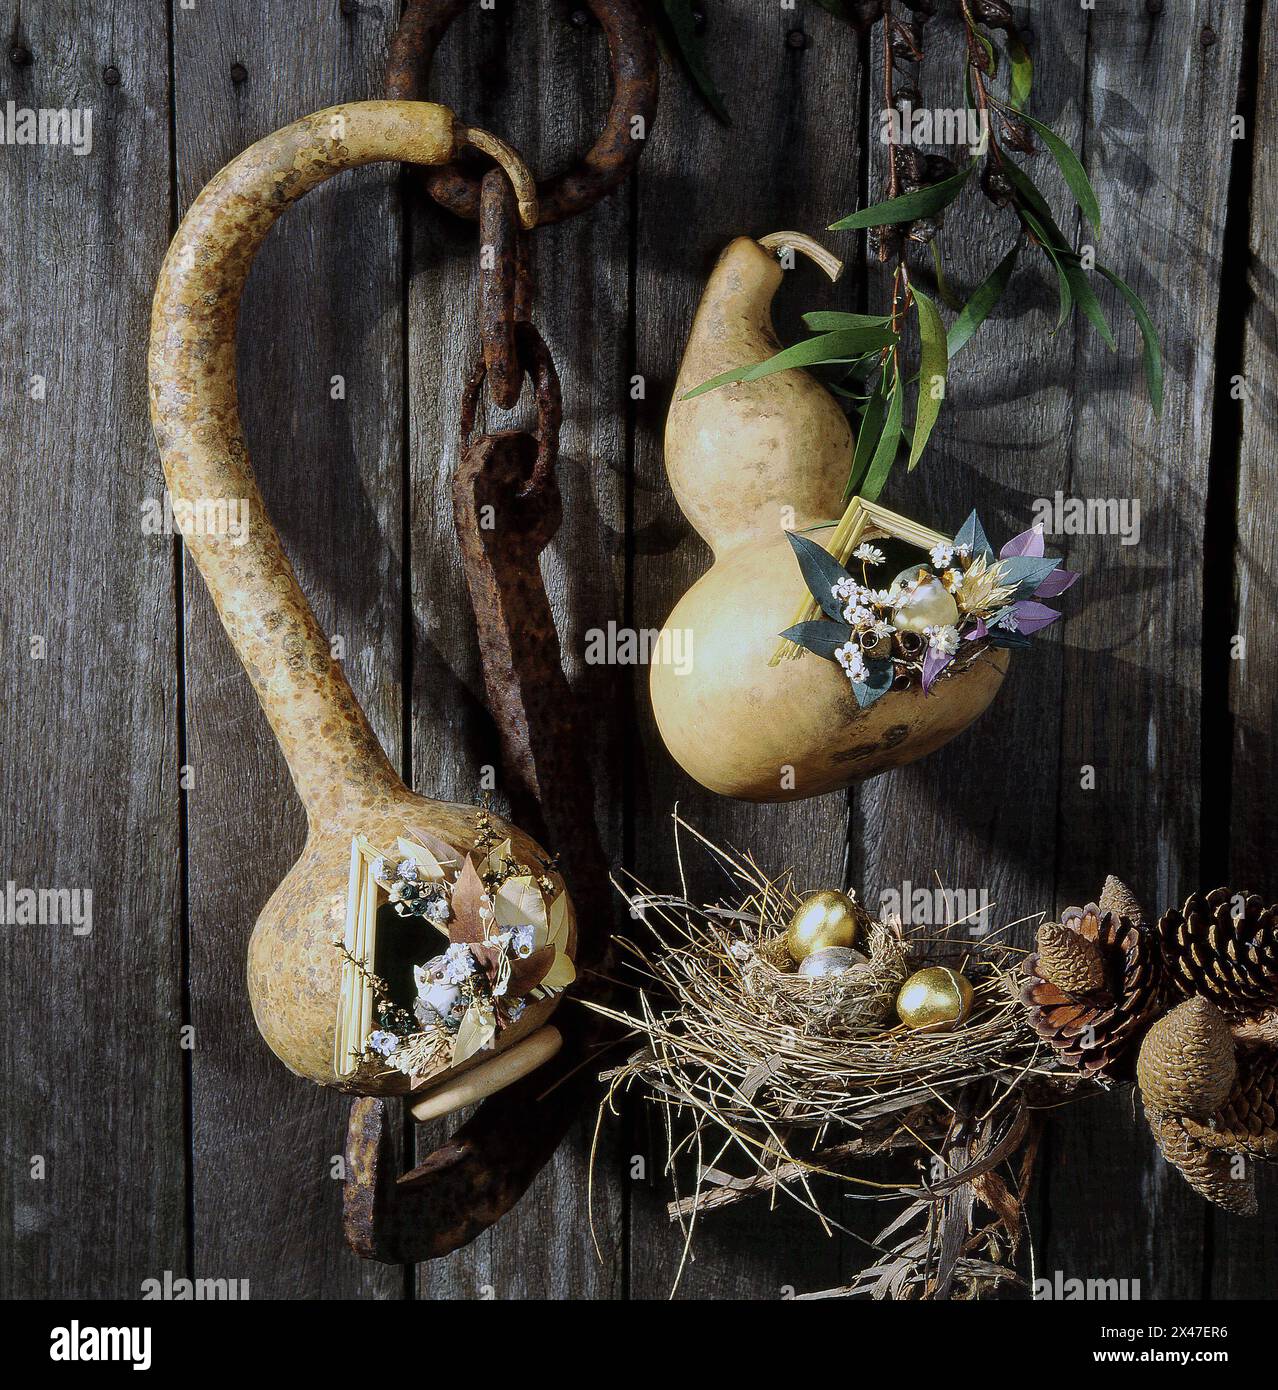 DECORATED GOURDS USED AS BIRDHOUSES HANGING FROM CHAIN ON A TIMBER FENCE. Stock Photo